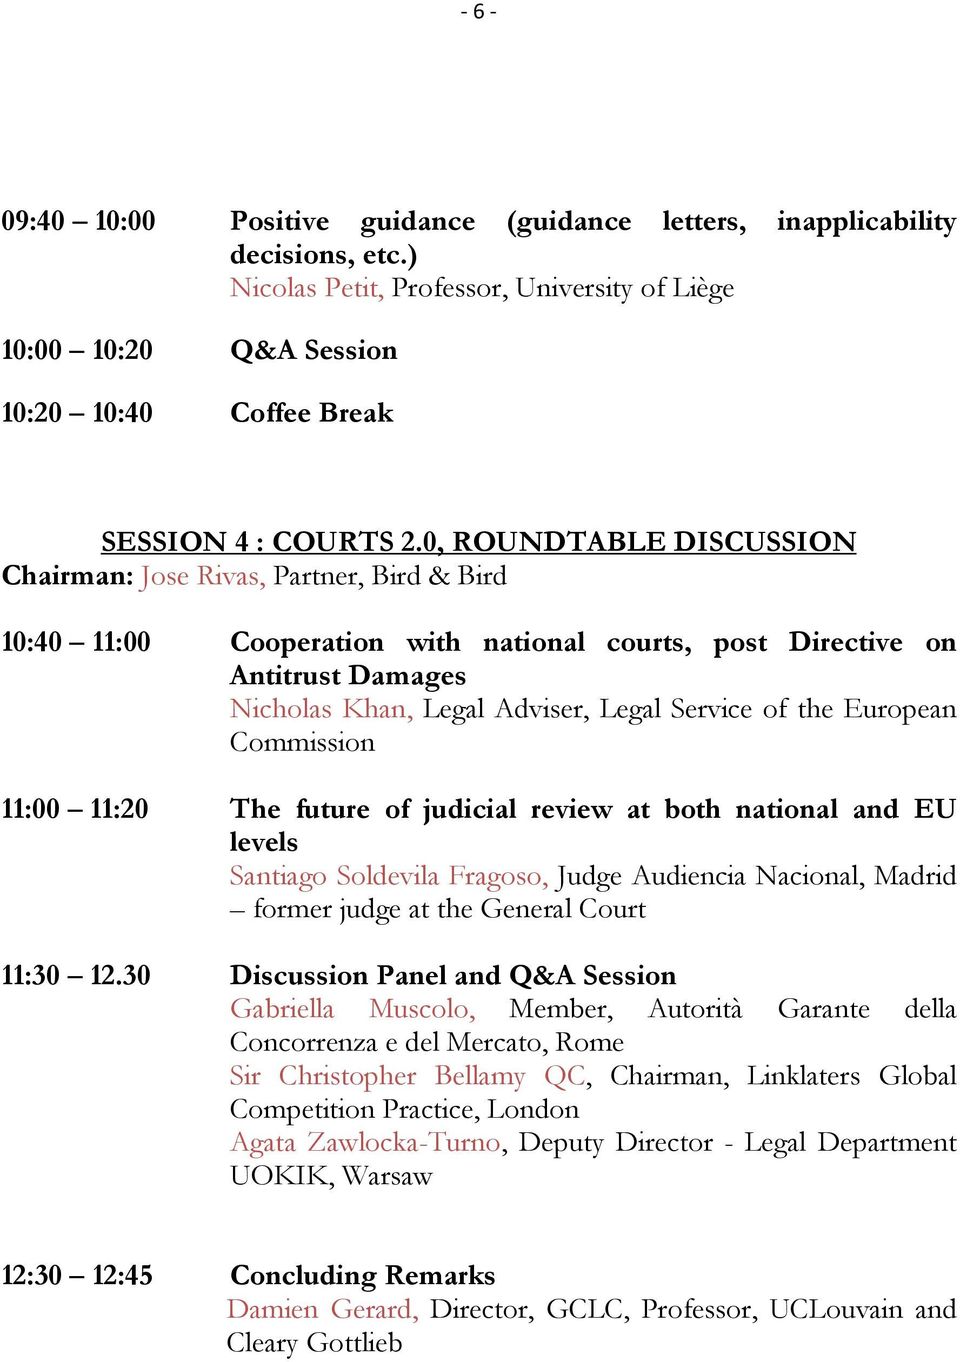 0, ROUNDTABLE DISCUSSION Chairman: Jose Rivas, Partner, Bird & Bird 10:40 11:00 Cooperation with national courts, post Directive on Antitrust Damages Nicholas Khan, Legal Adviser, Legal Service of